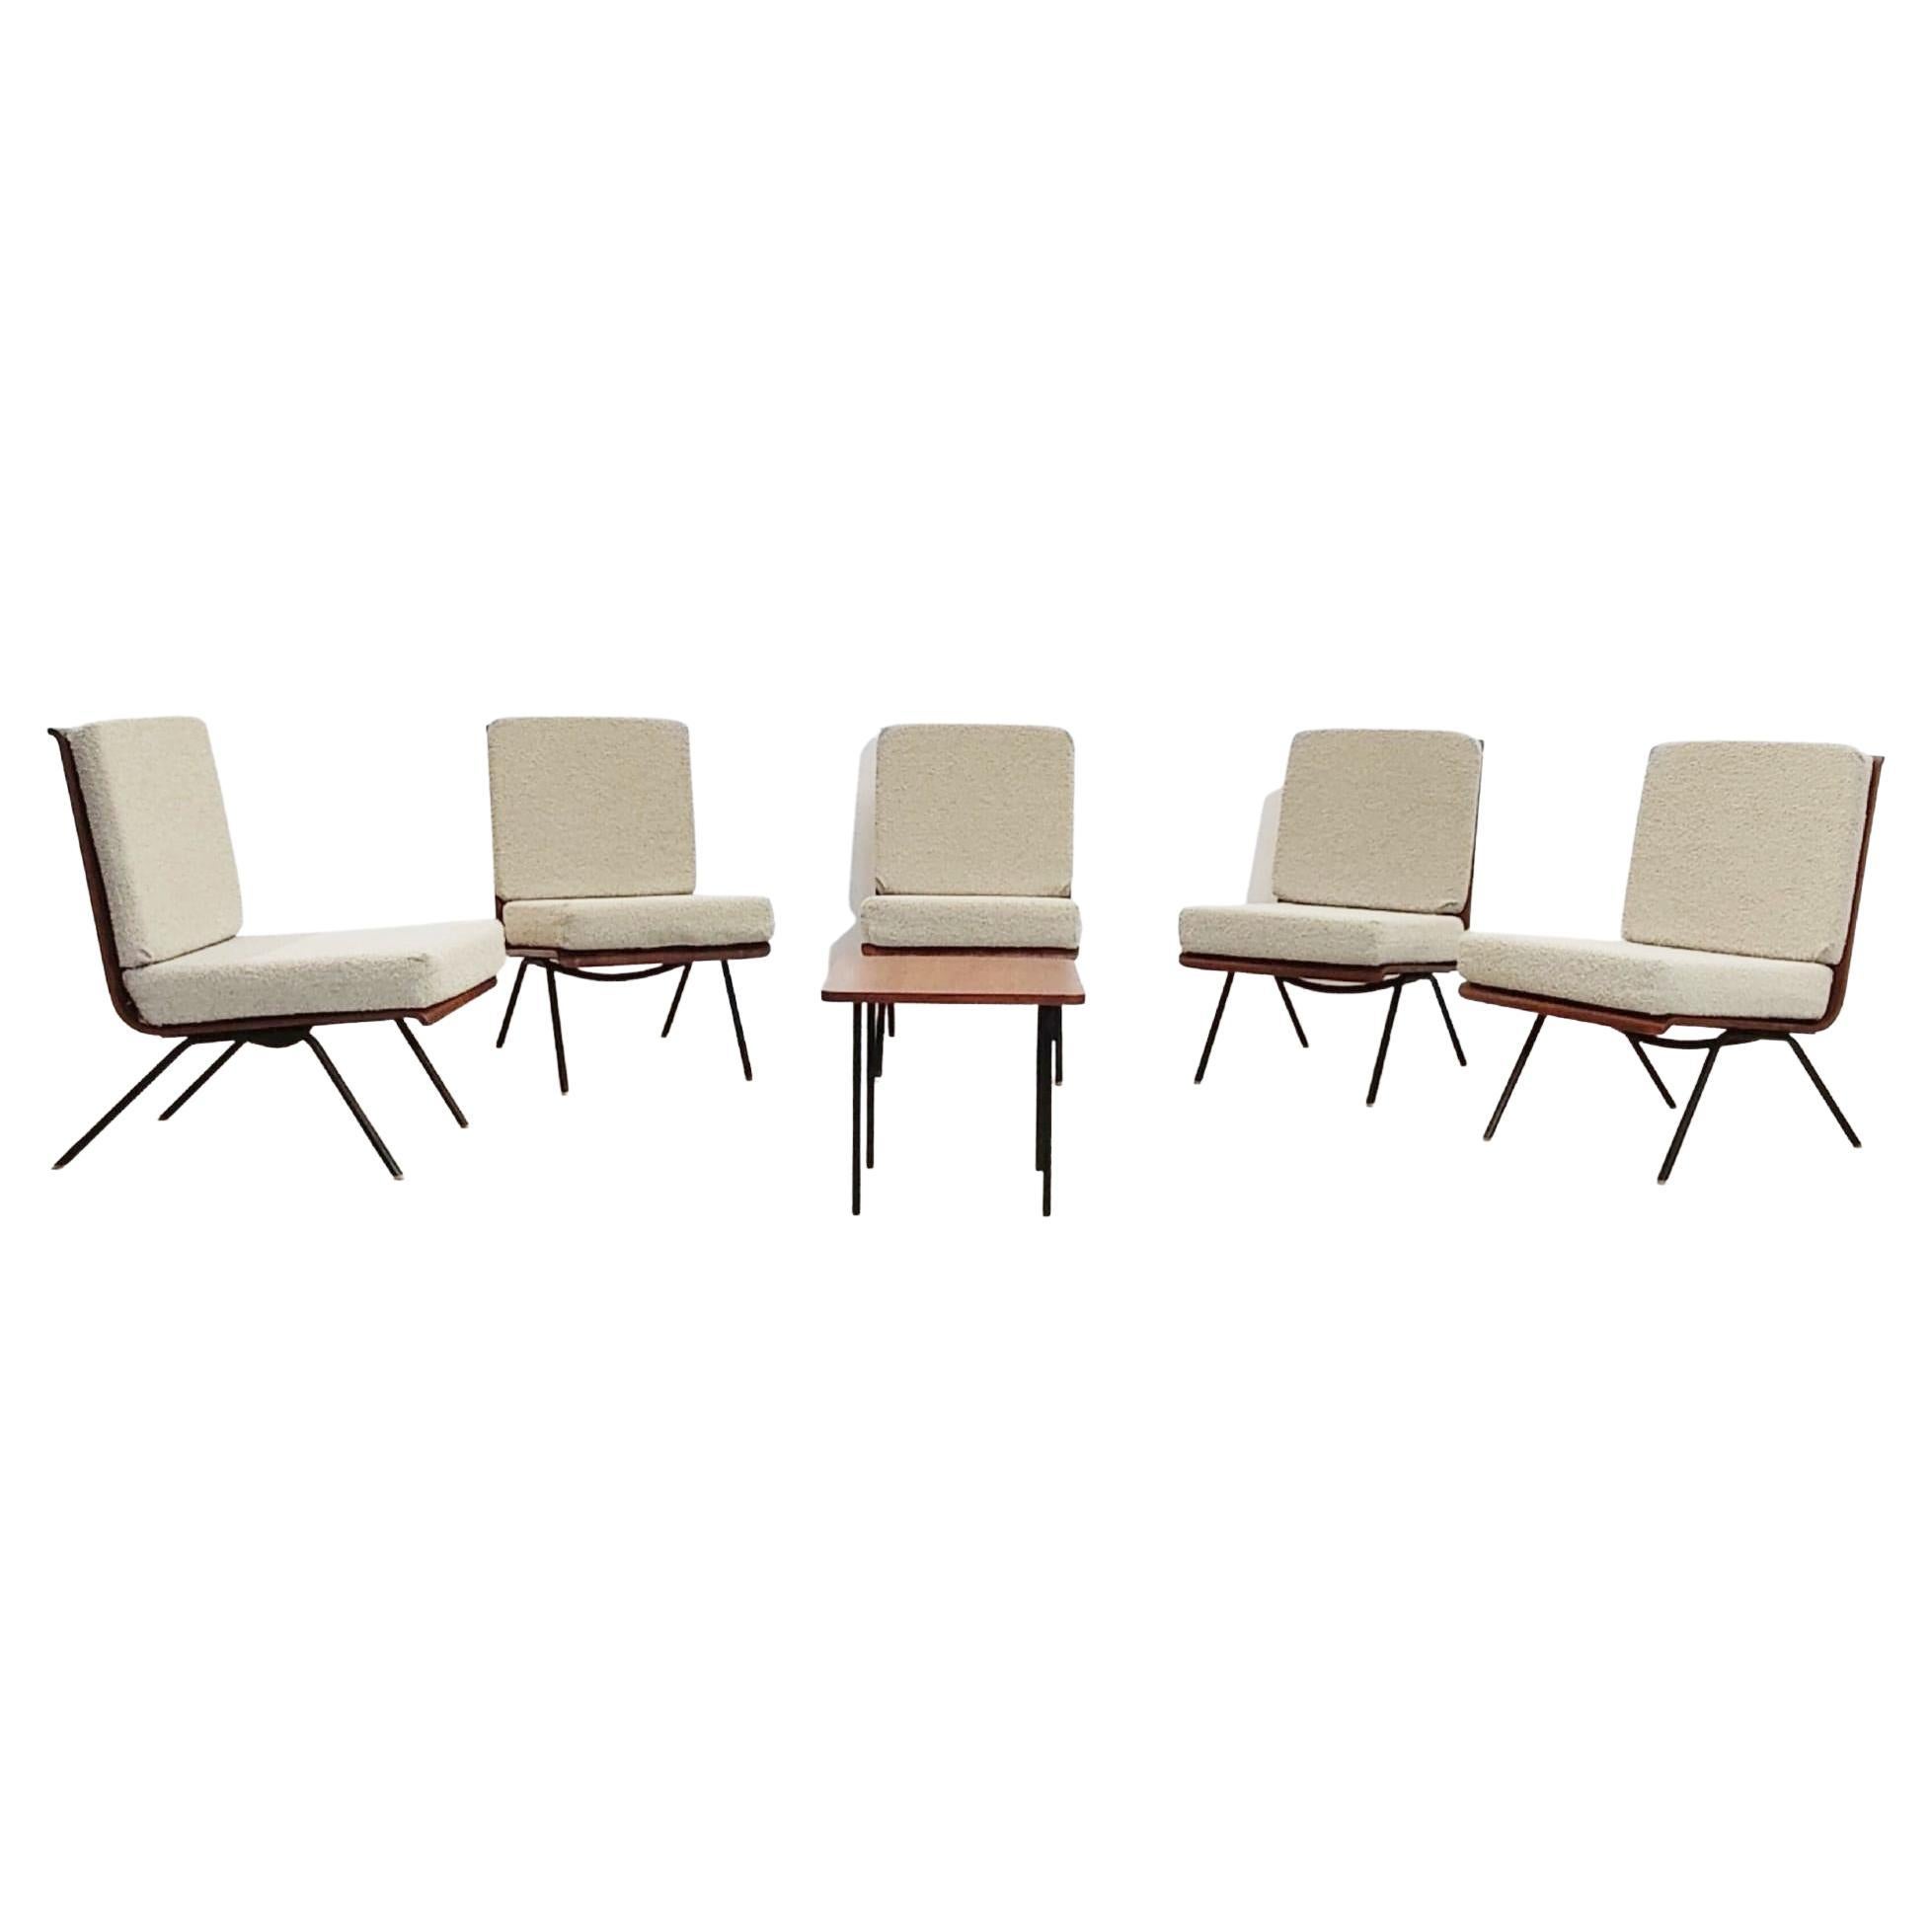 Set of 5 Lounge Chairs and Coffee Table by Franco Campo & Carlo Graffi, Italy